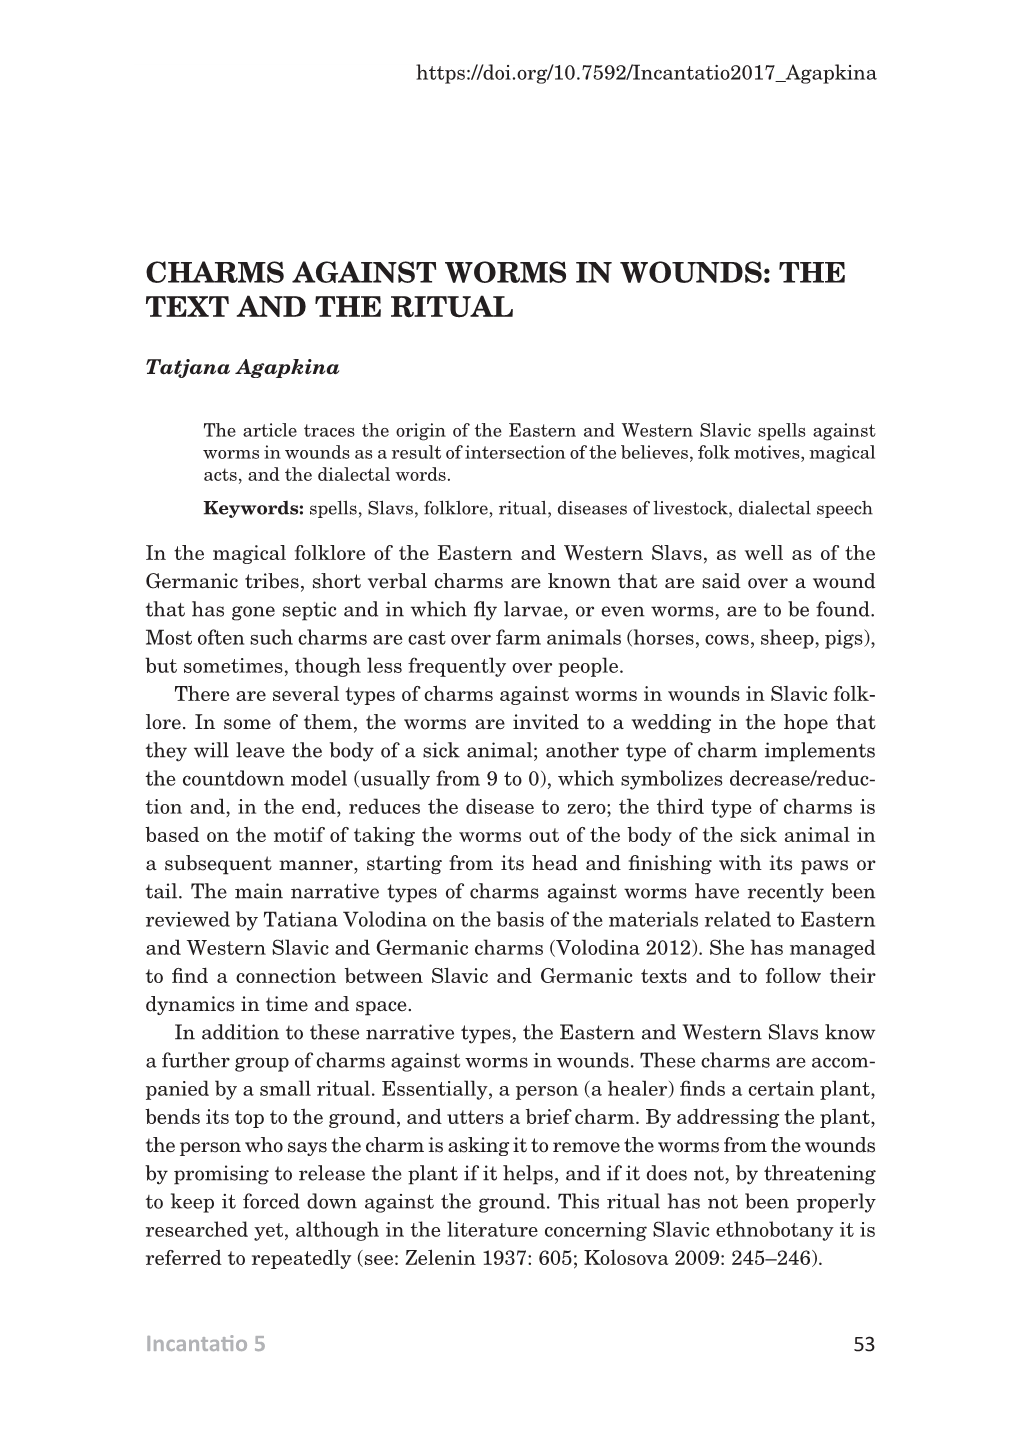 Charms Against Worms in Wounds: the Text and the Ritual